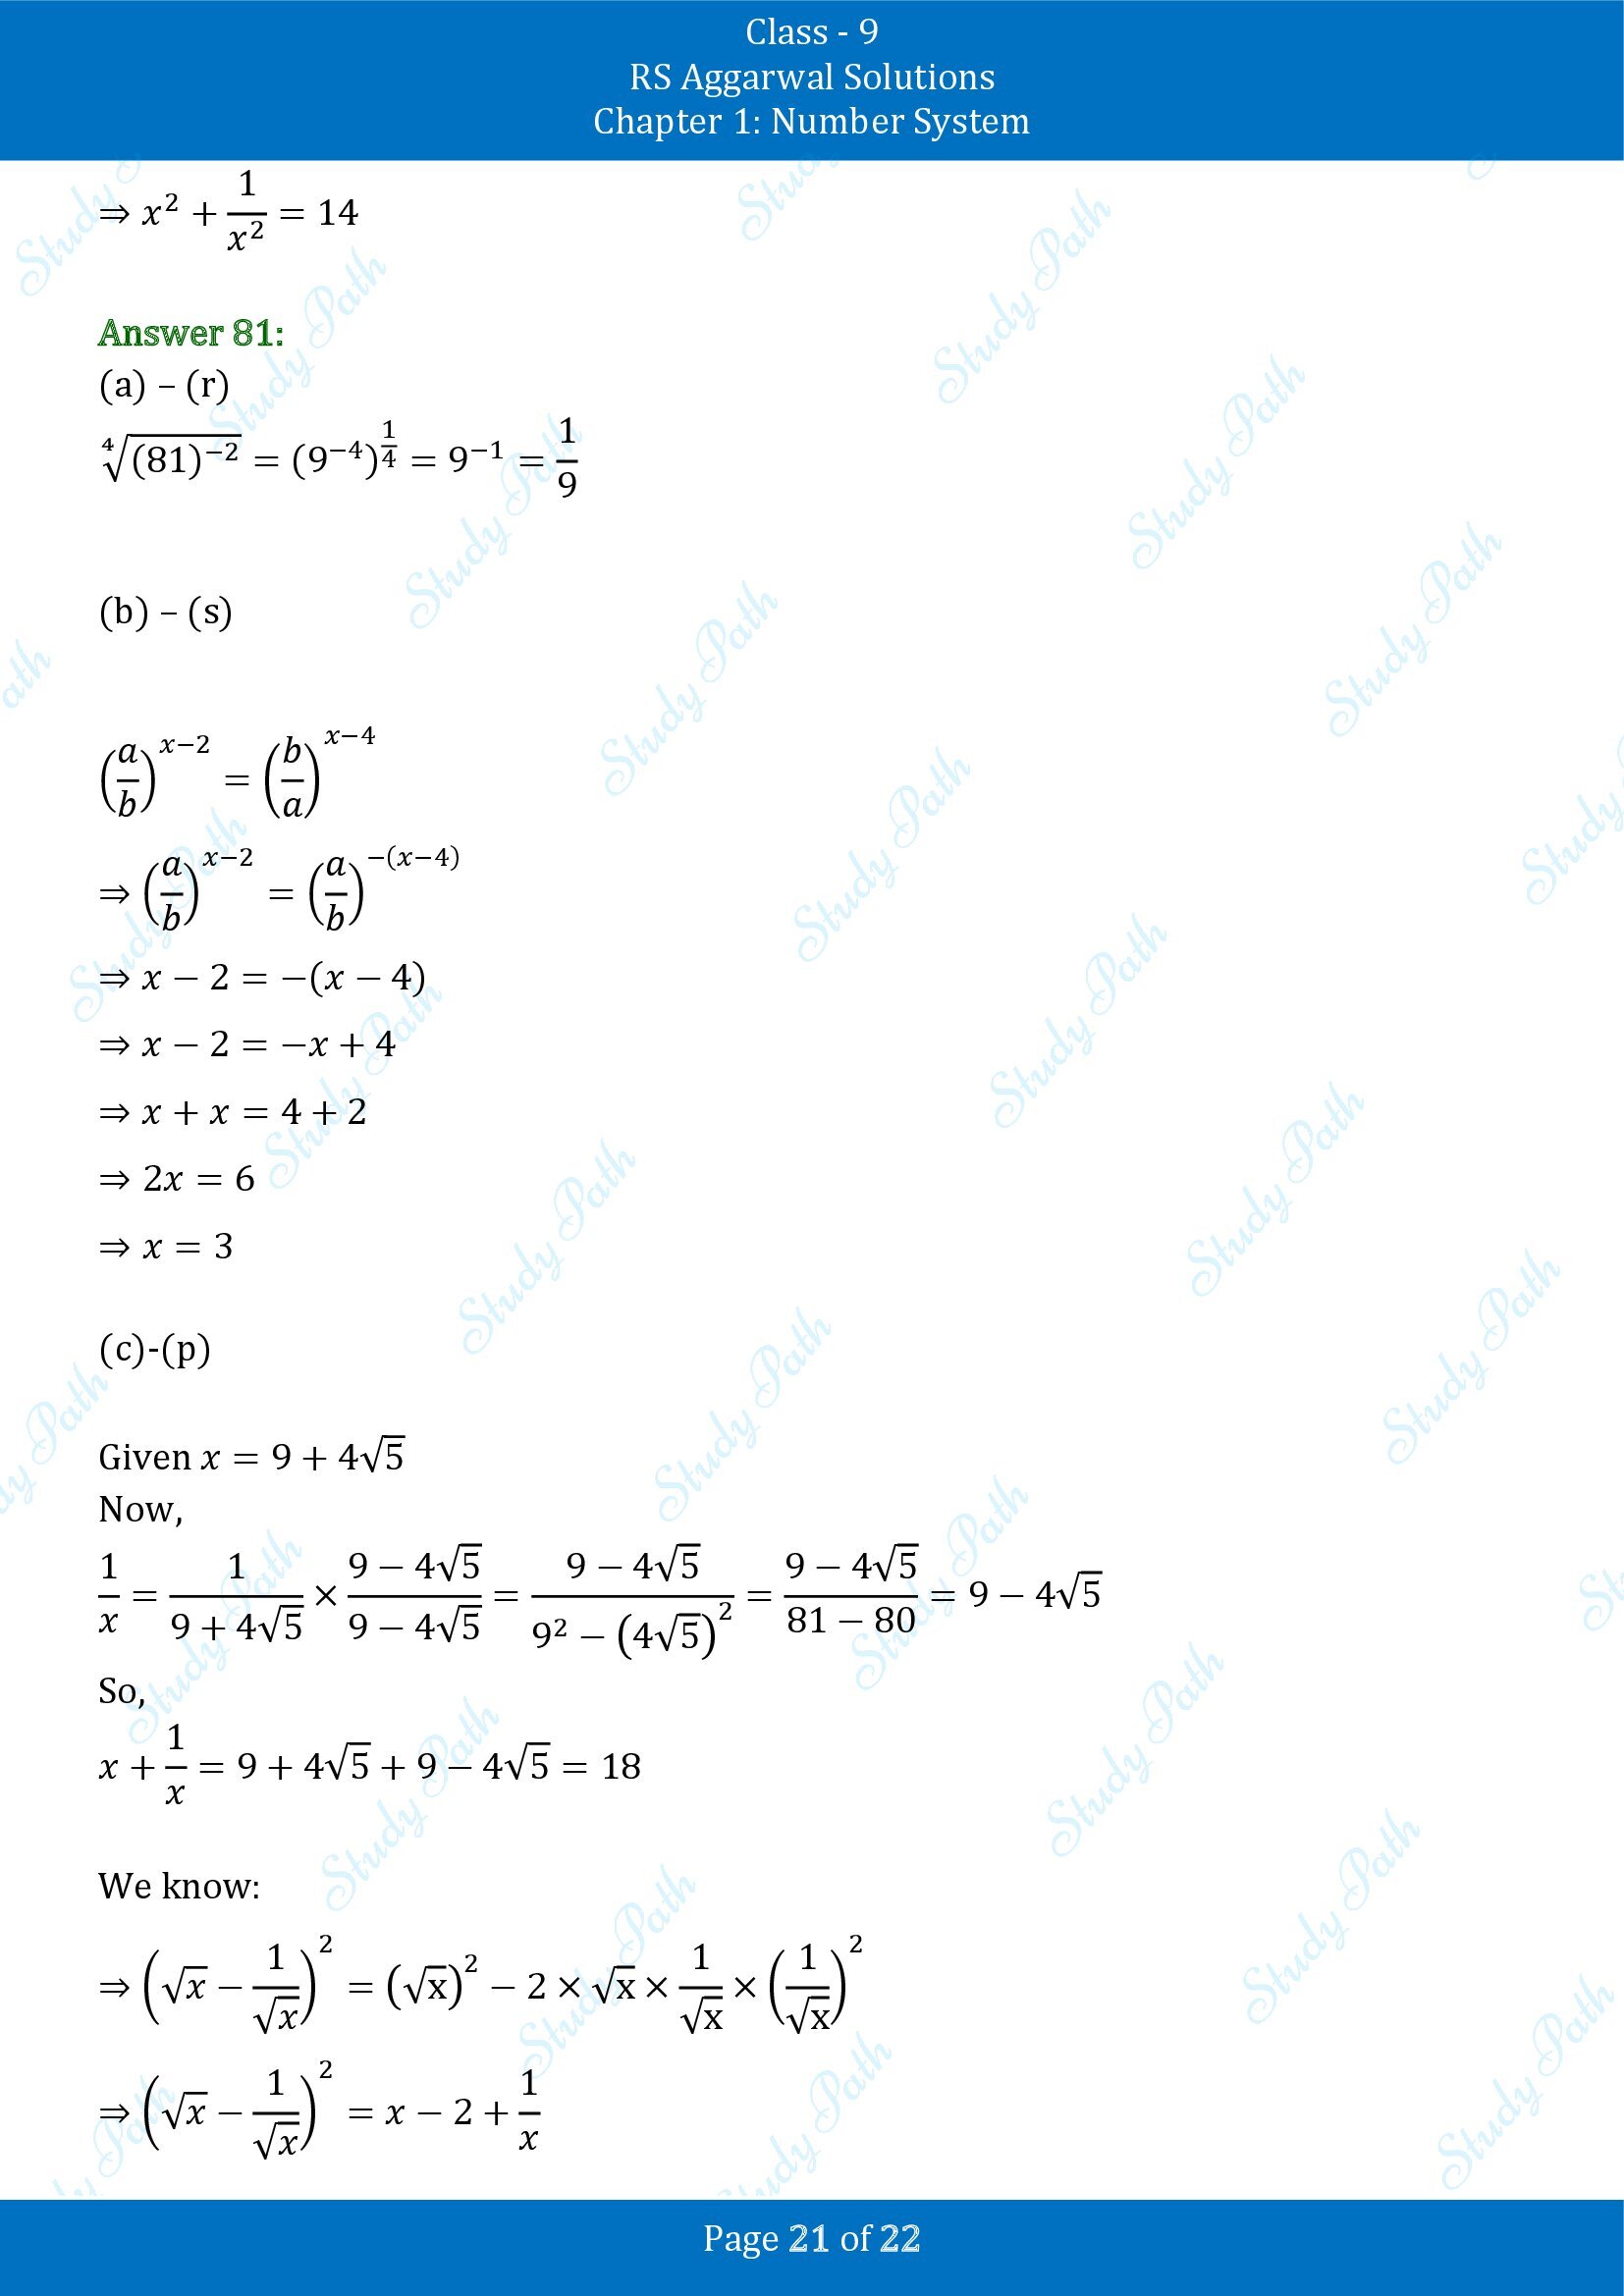 RS Aggarwal Solutions Class 9 Chapter 1 Number System Multiple Choice Questions MCQs 00021